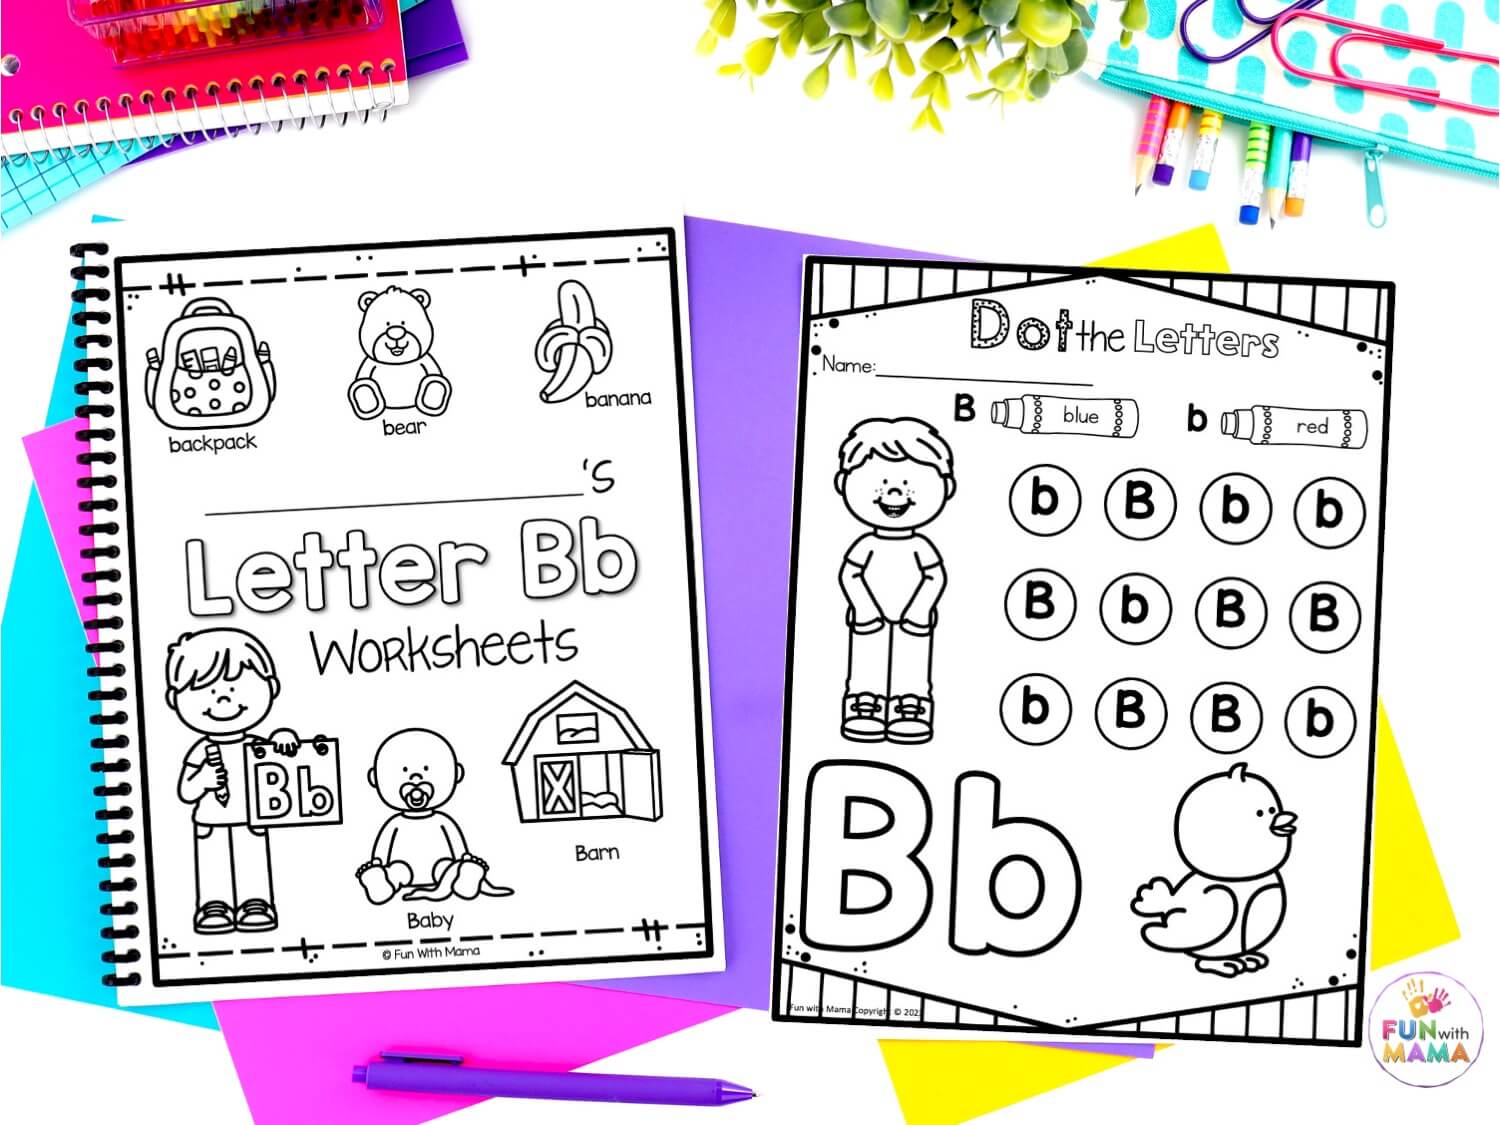 2 Worksheets with things that start with 'b' and dot the letters